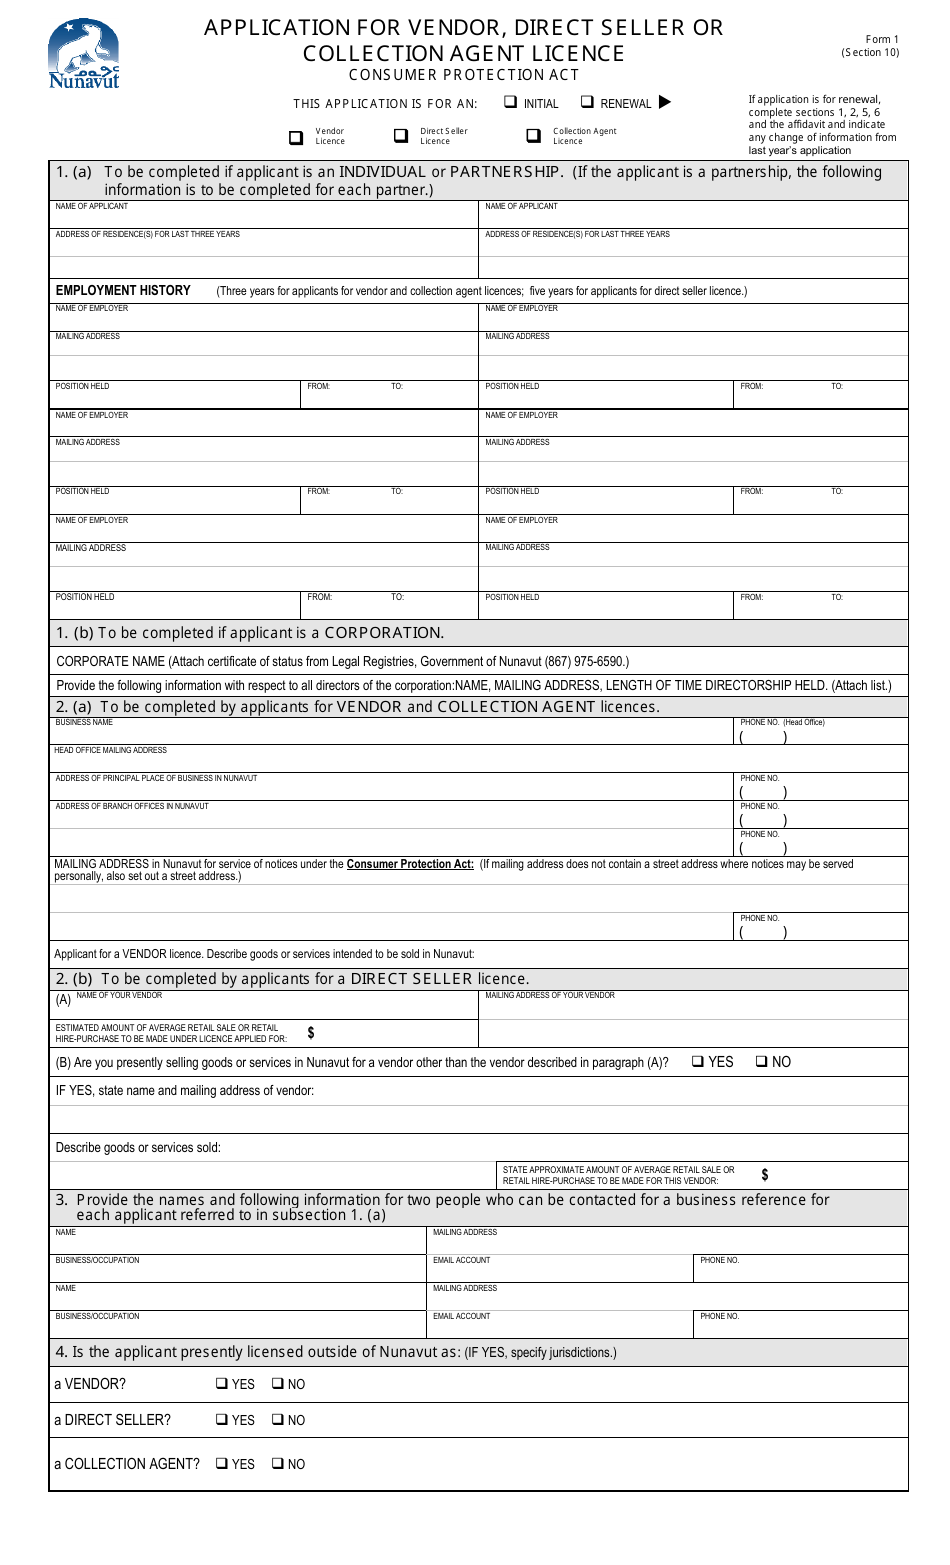 Form 1 Application for Vendor, Direct Sellers or Collection Agents Licence - Nunavut, Canada, Page 1